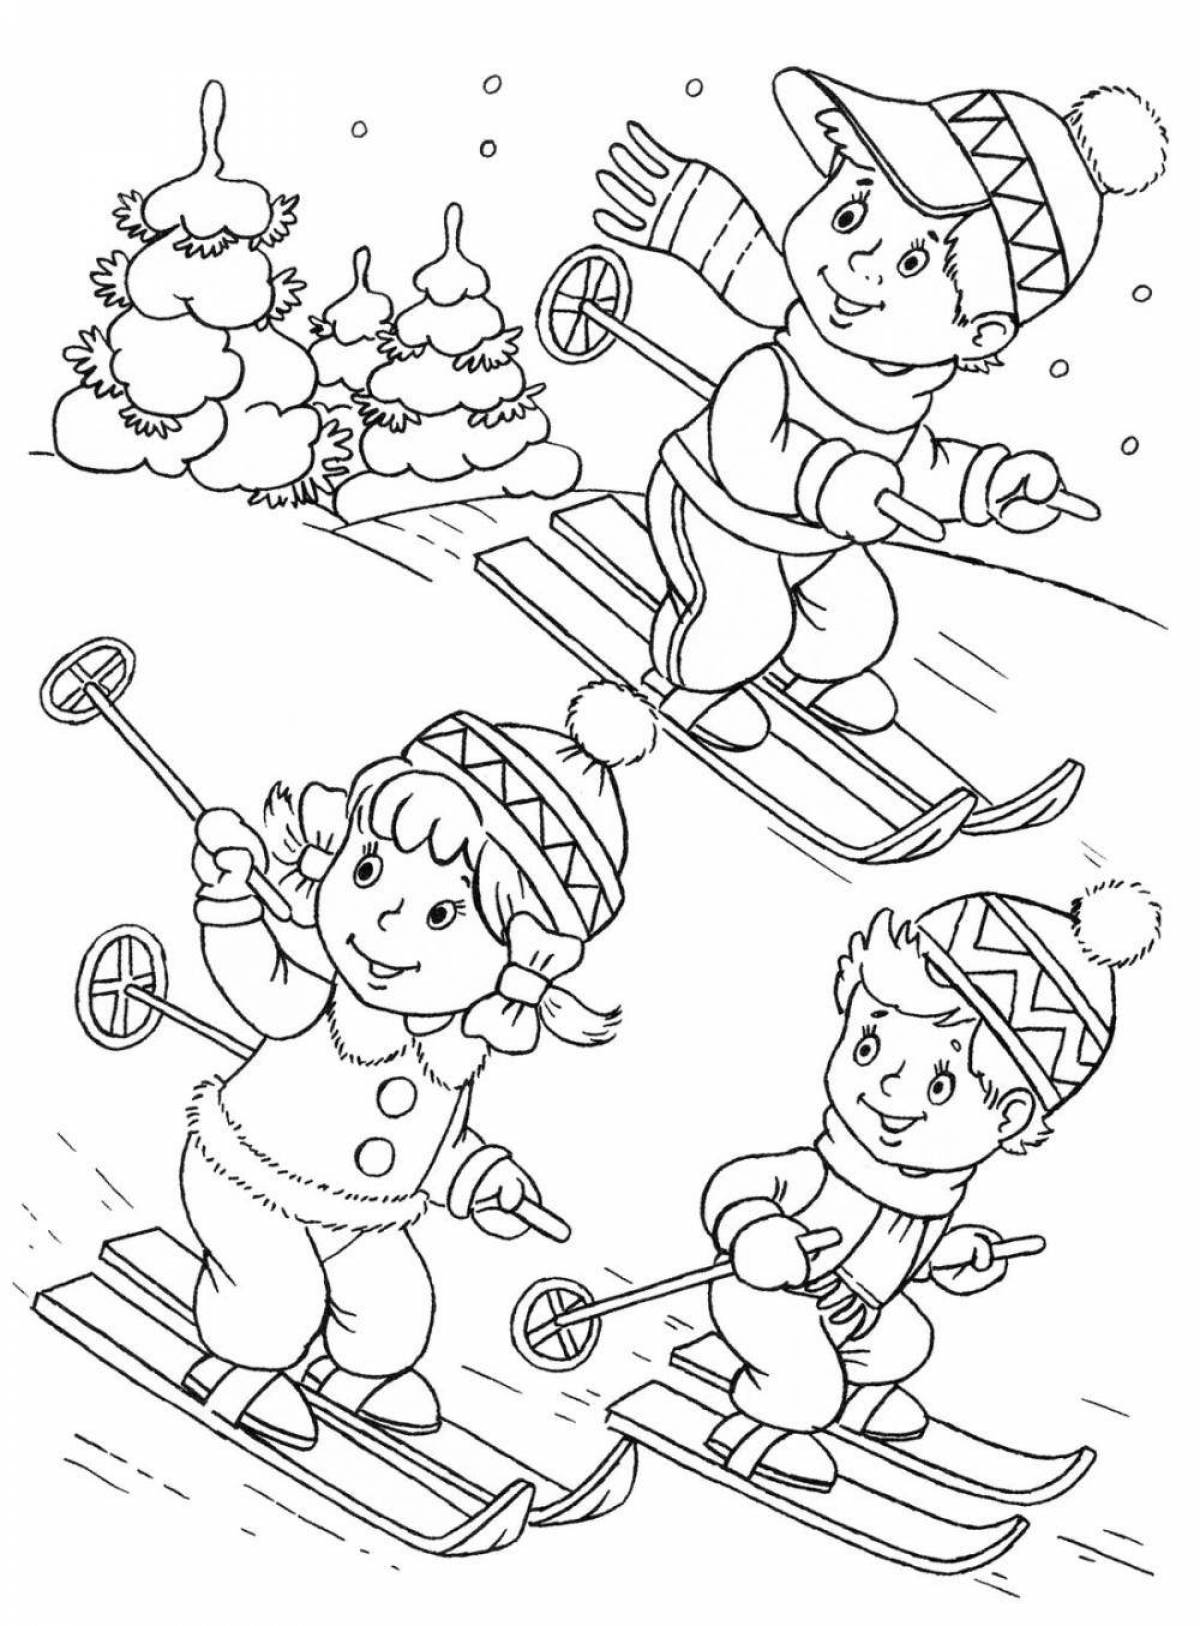 Animated coloring winter sports for preschoolers